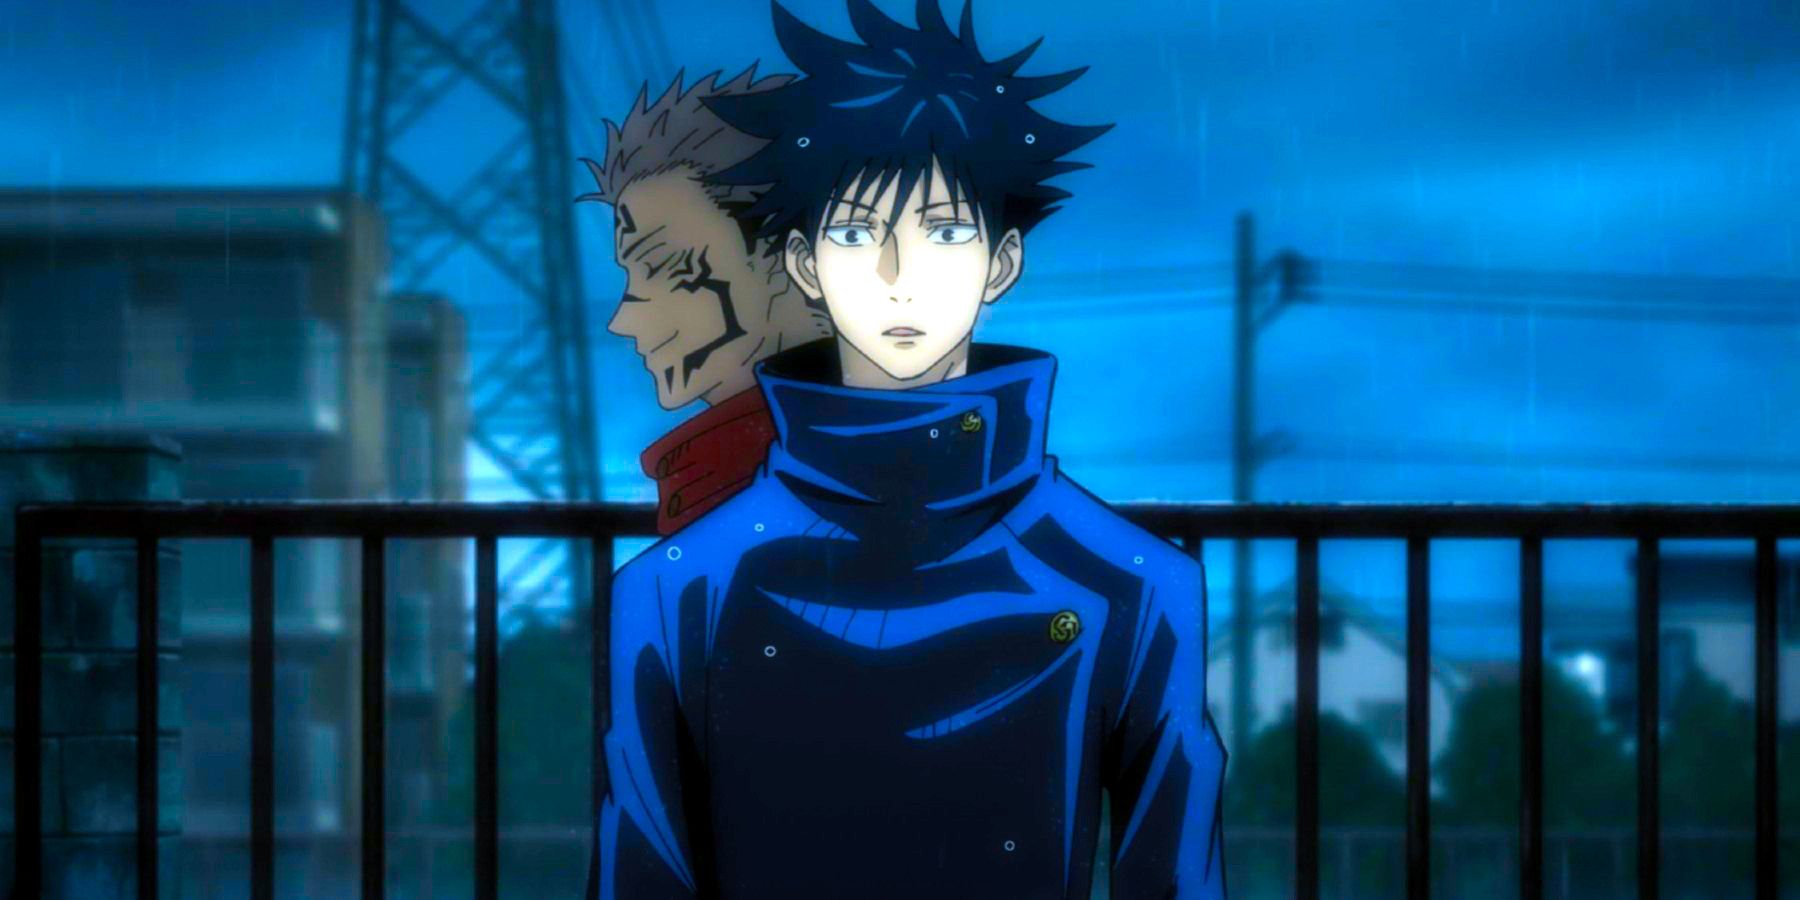 Jujutsu Kaisen Itadori S Early Death Is Surprising But Only Temporary